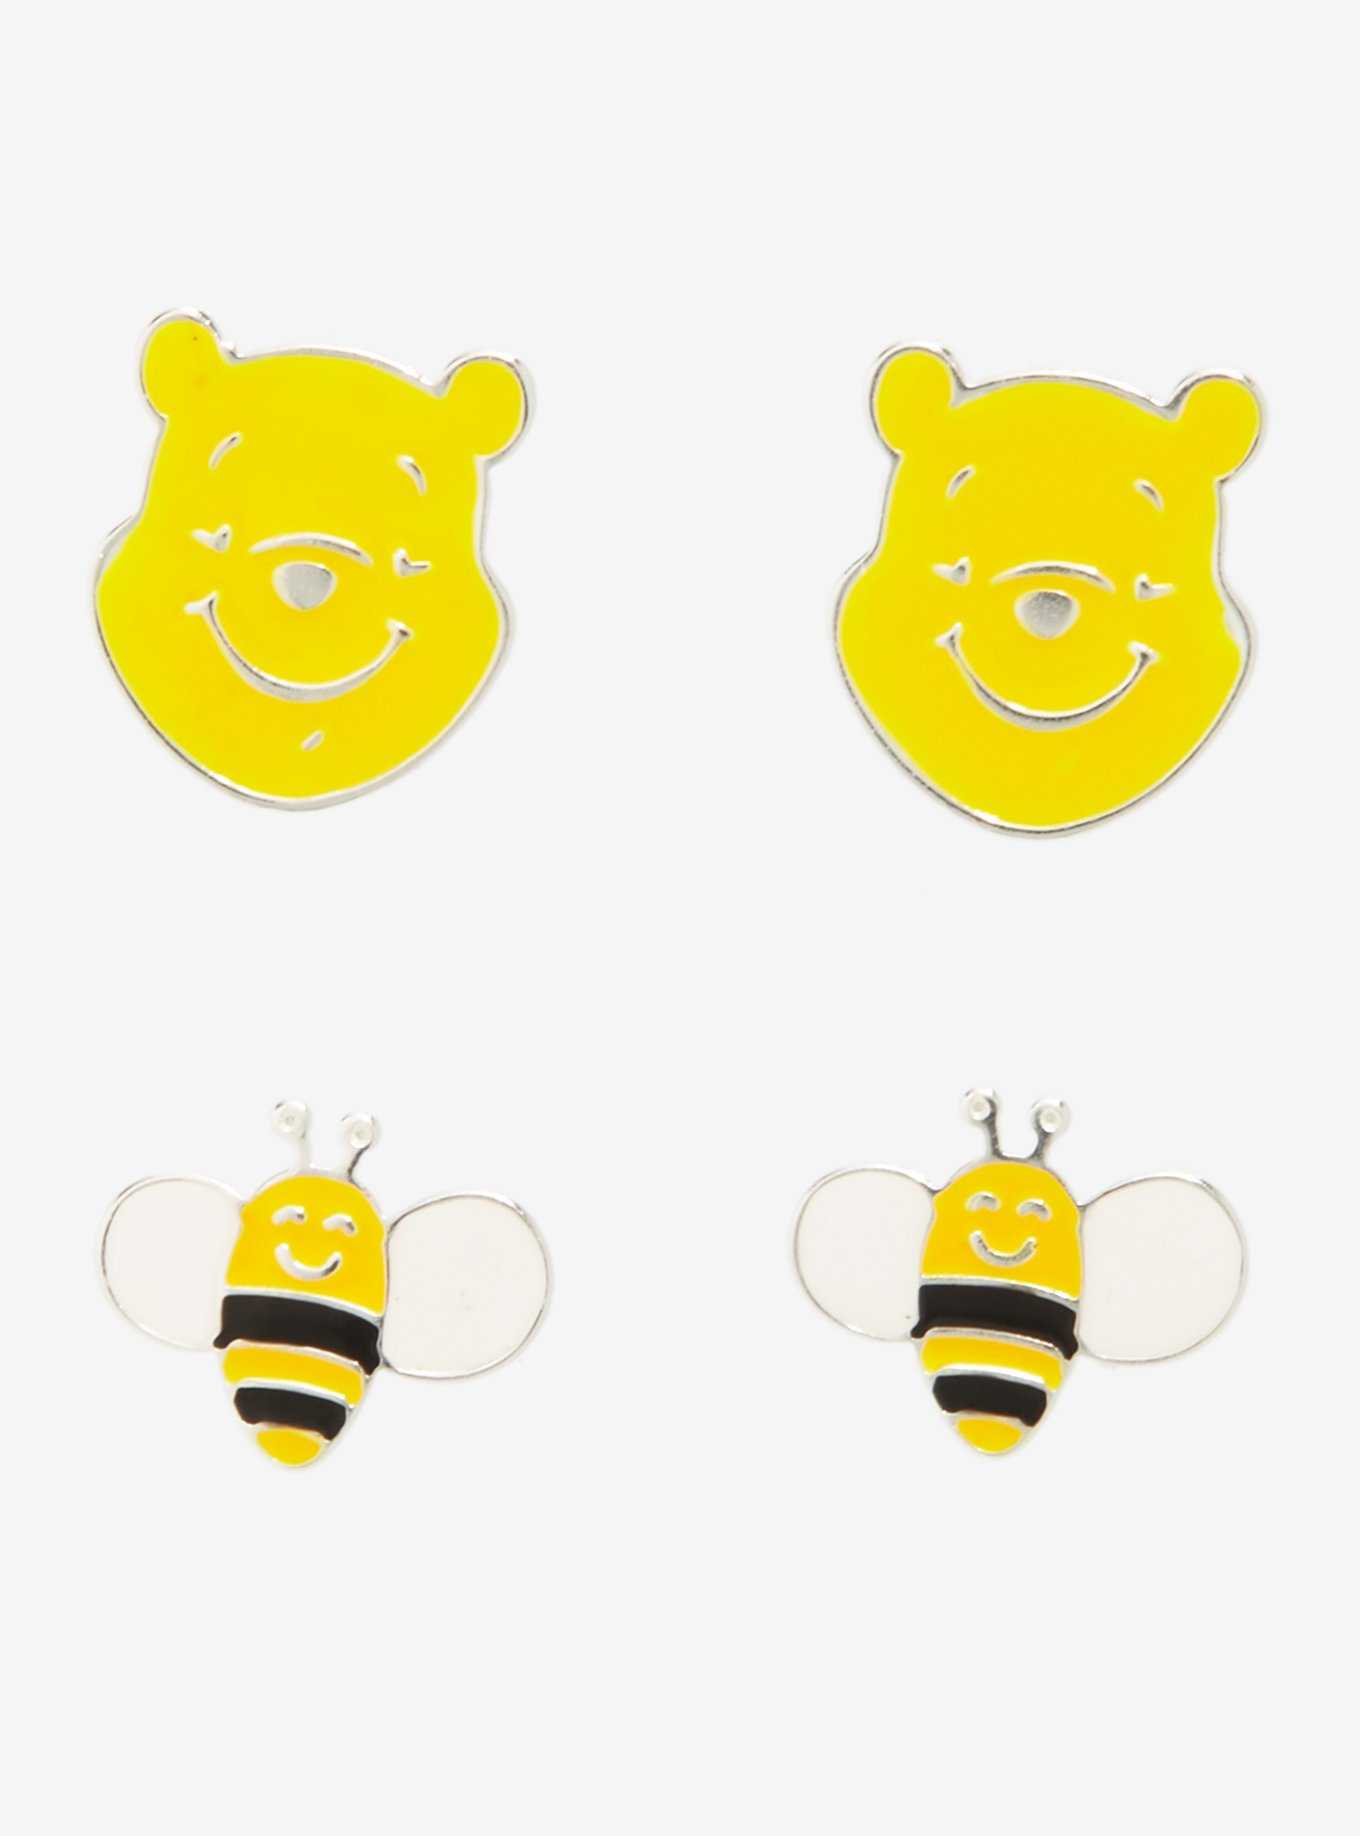 Disney Winnie the Pooh Bees & Pooh Bear Earring Set - BoxLunch Exclusive, , hi-res